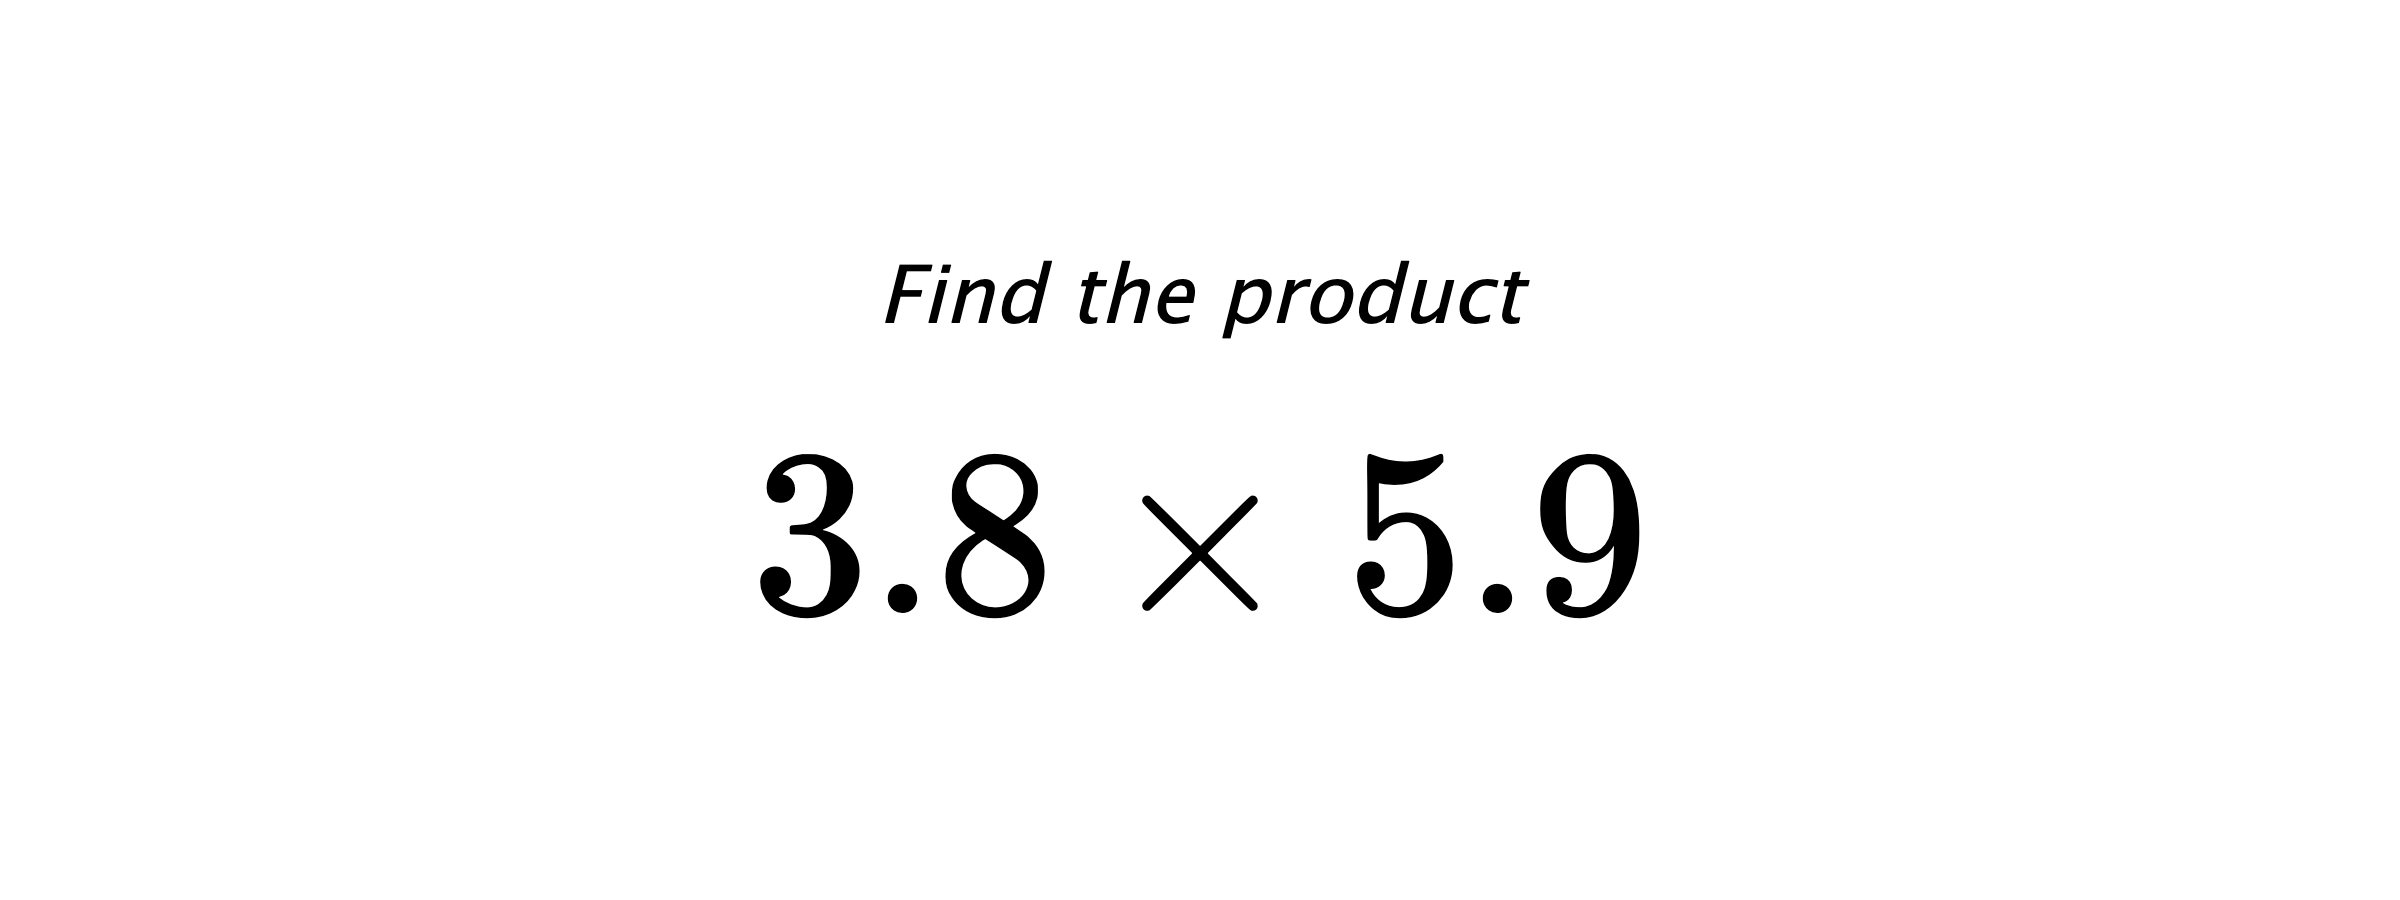 Find the product $ 3.8 \times 5.9 $